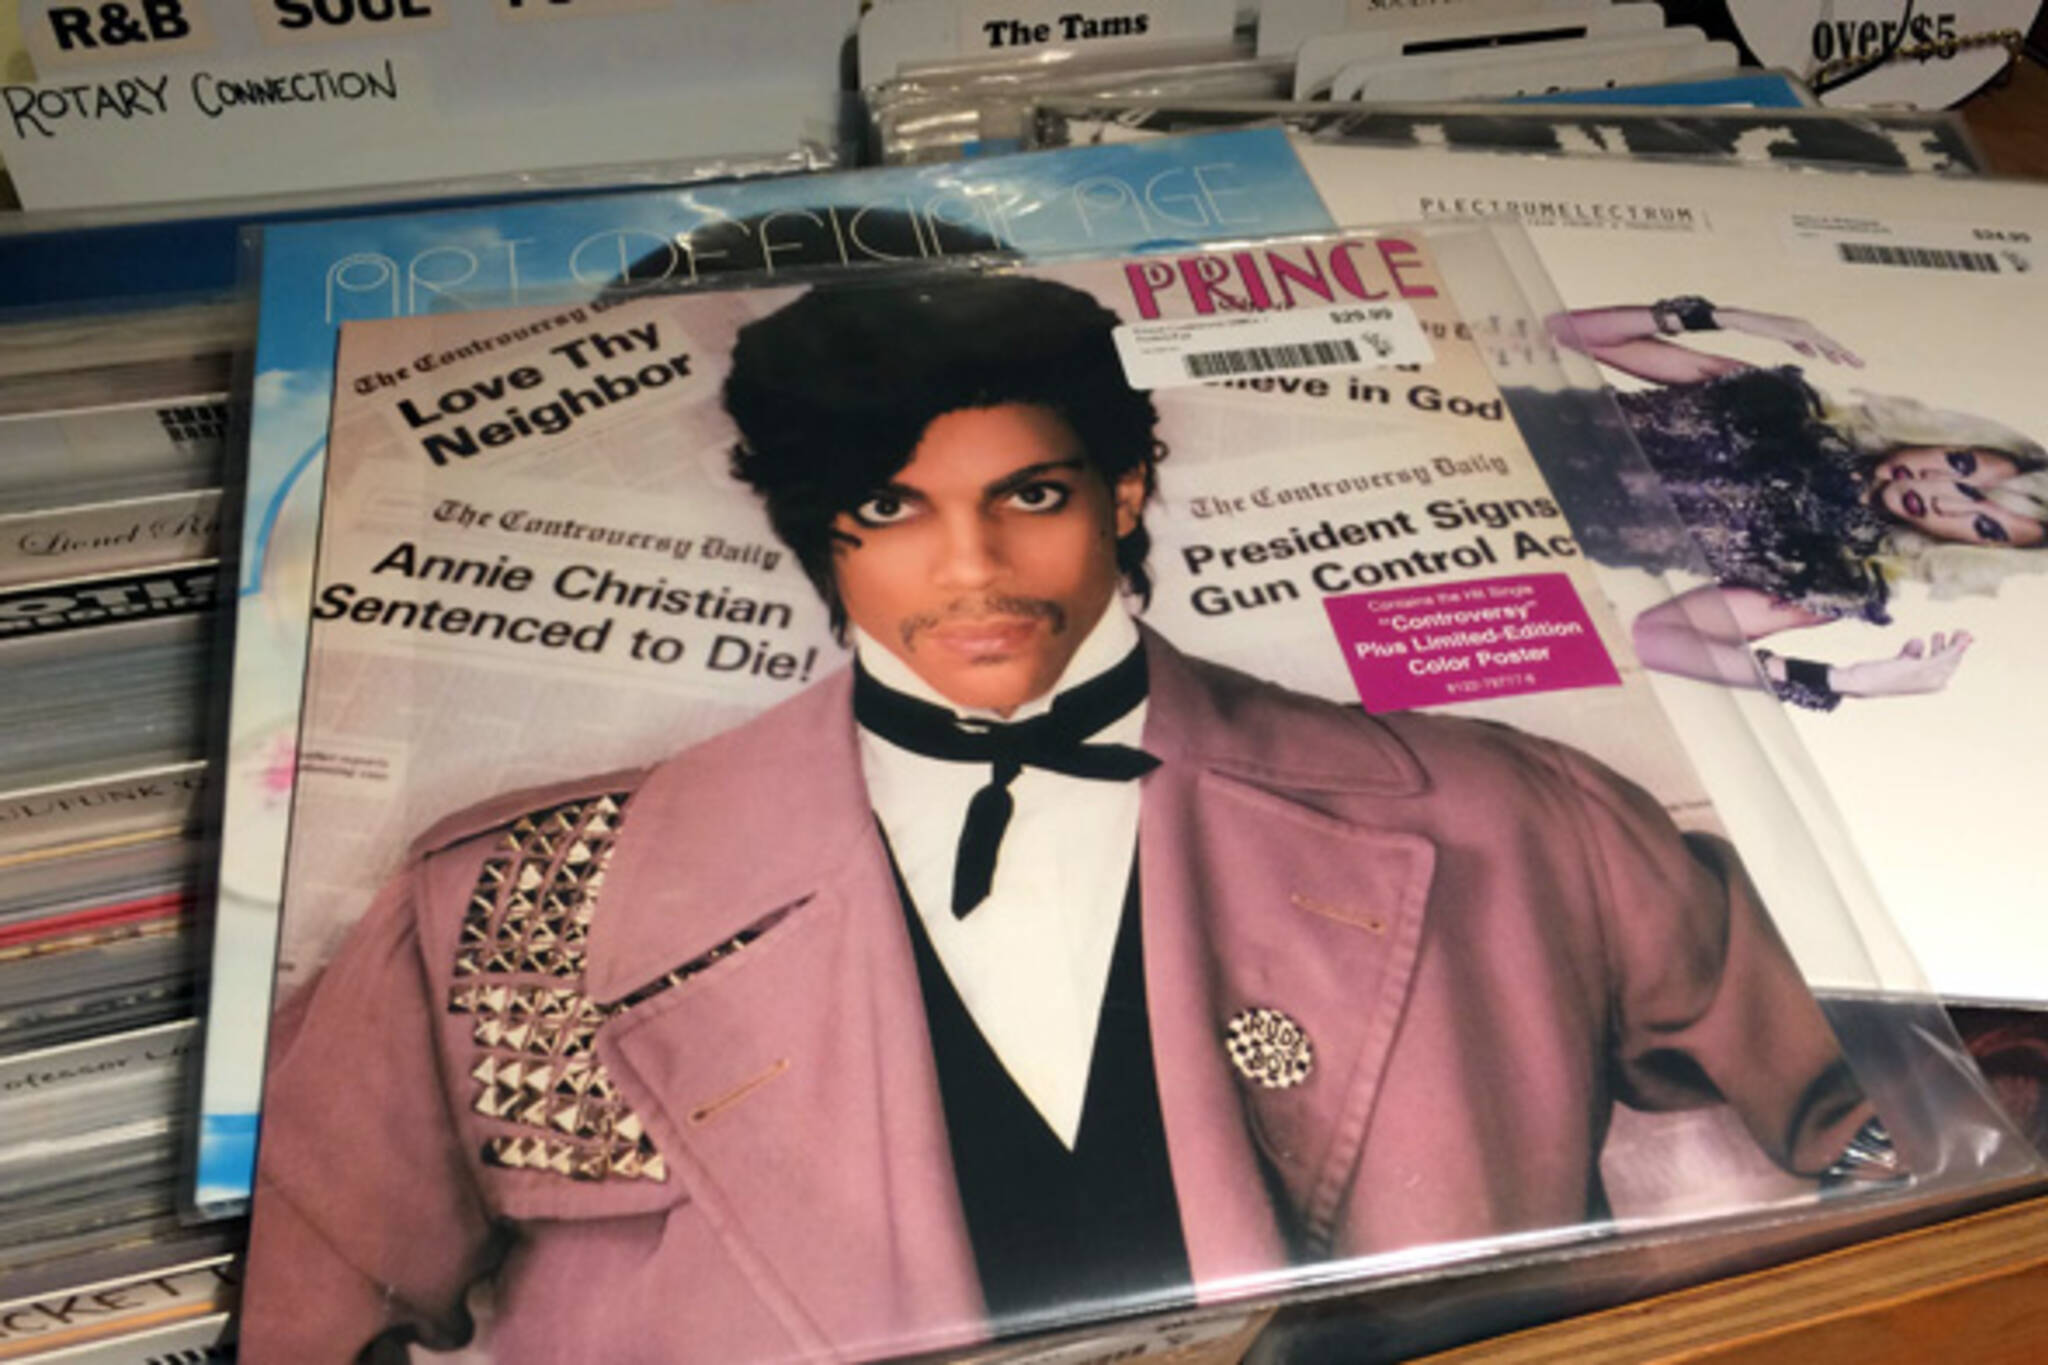 Toronto record stores see spike in Prince album sales